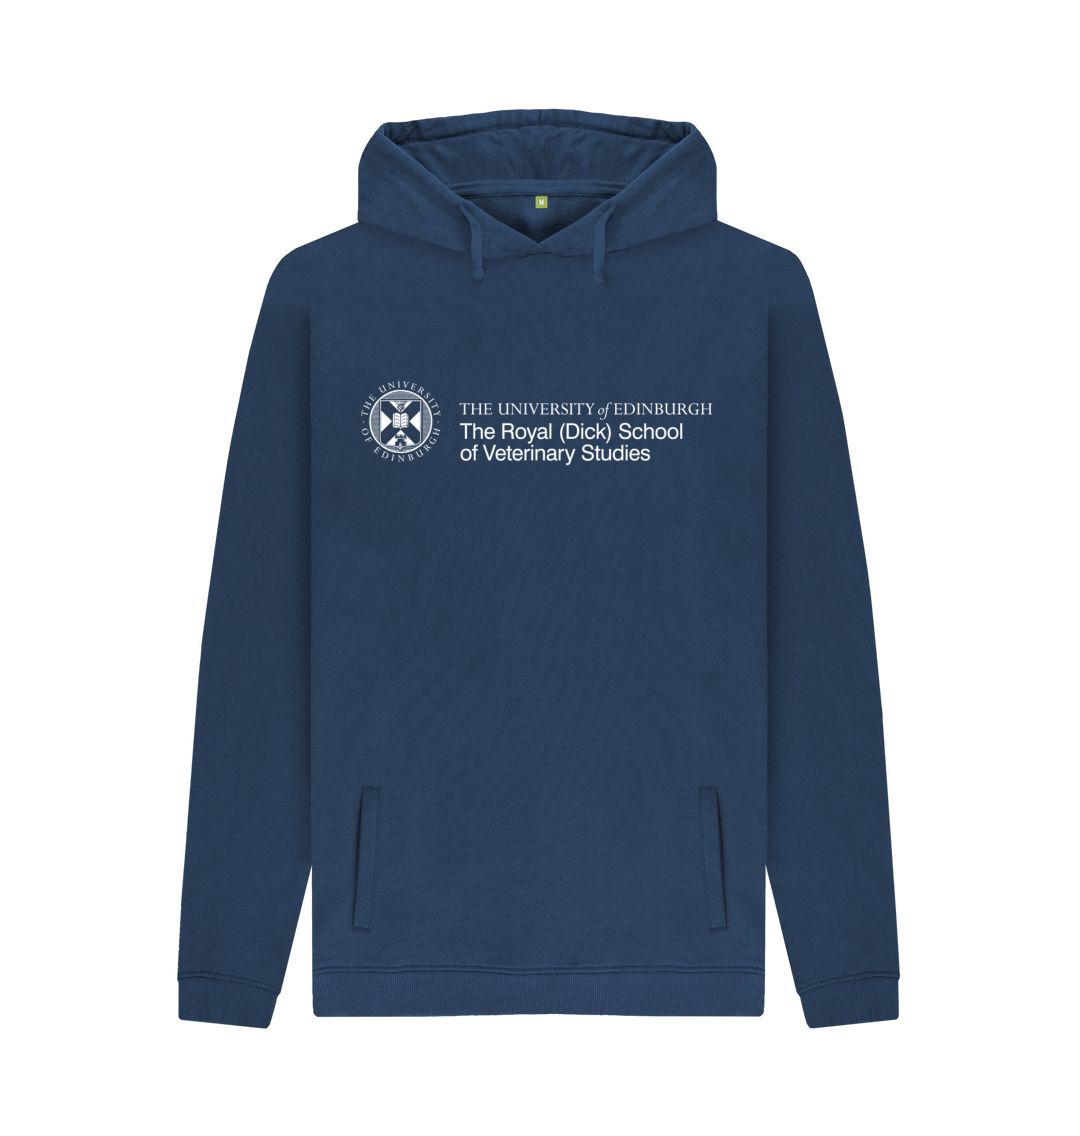 Navy hoodie with white University crest and text that reads ' University of Edinburgh:  The Royal (Dick) School of Veterinary Studies 